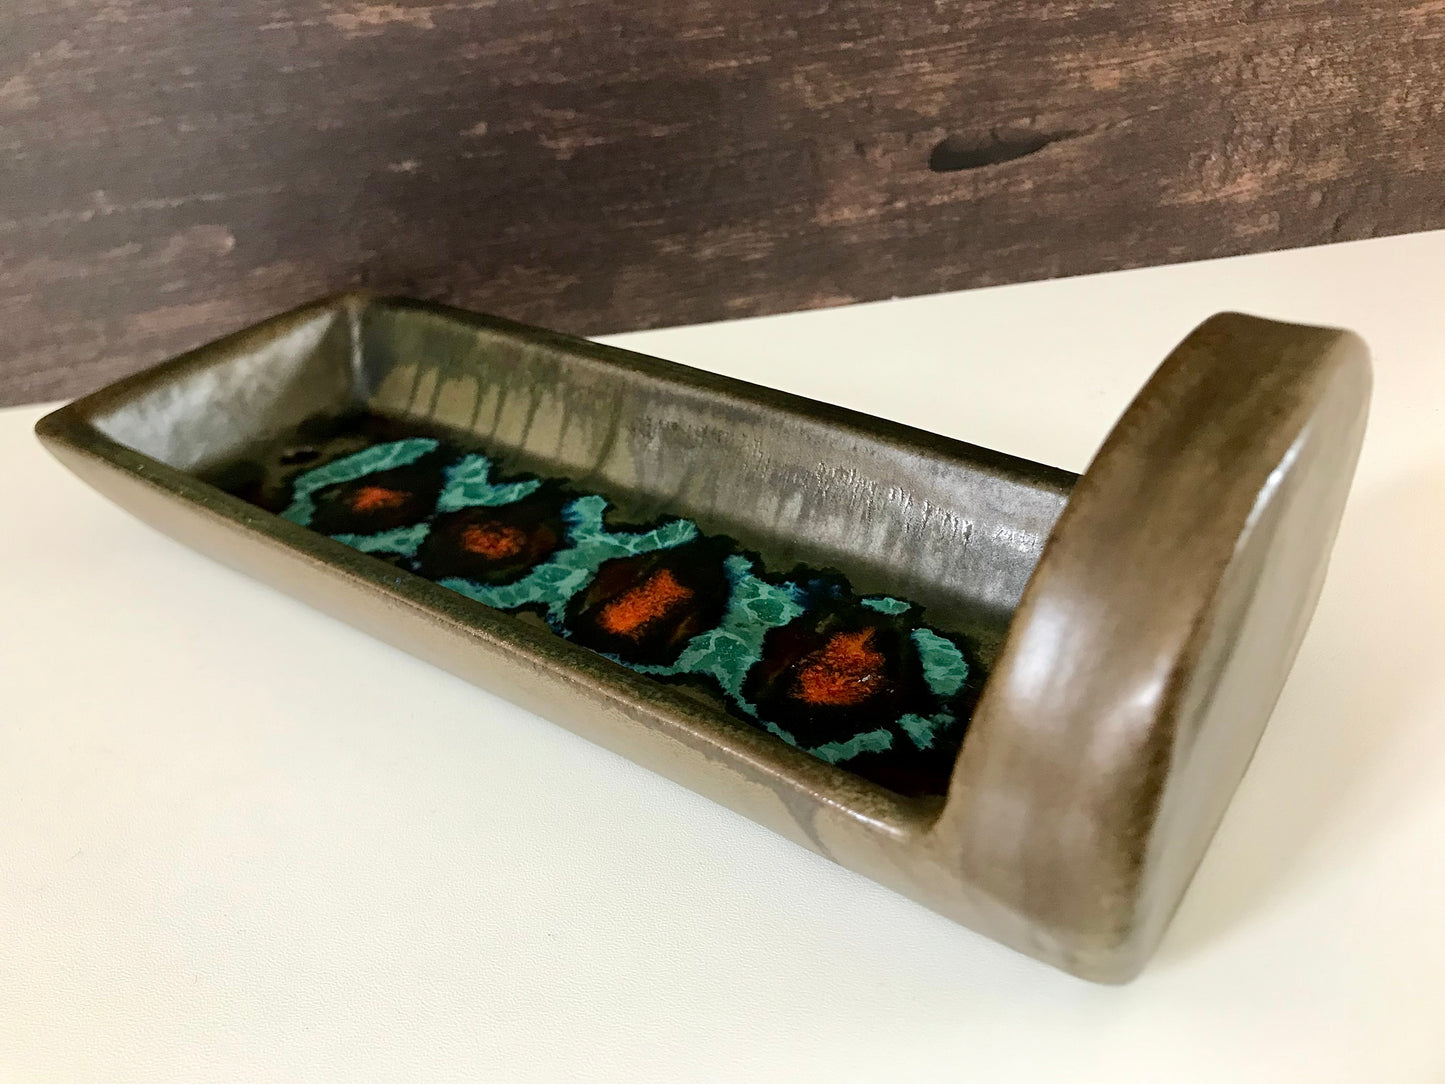 Vintage Danish Turquoise Orange Candle Holder Pottery Sconce Wall Relief 1960s 1970s